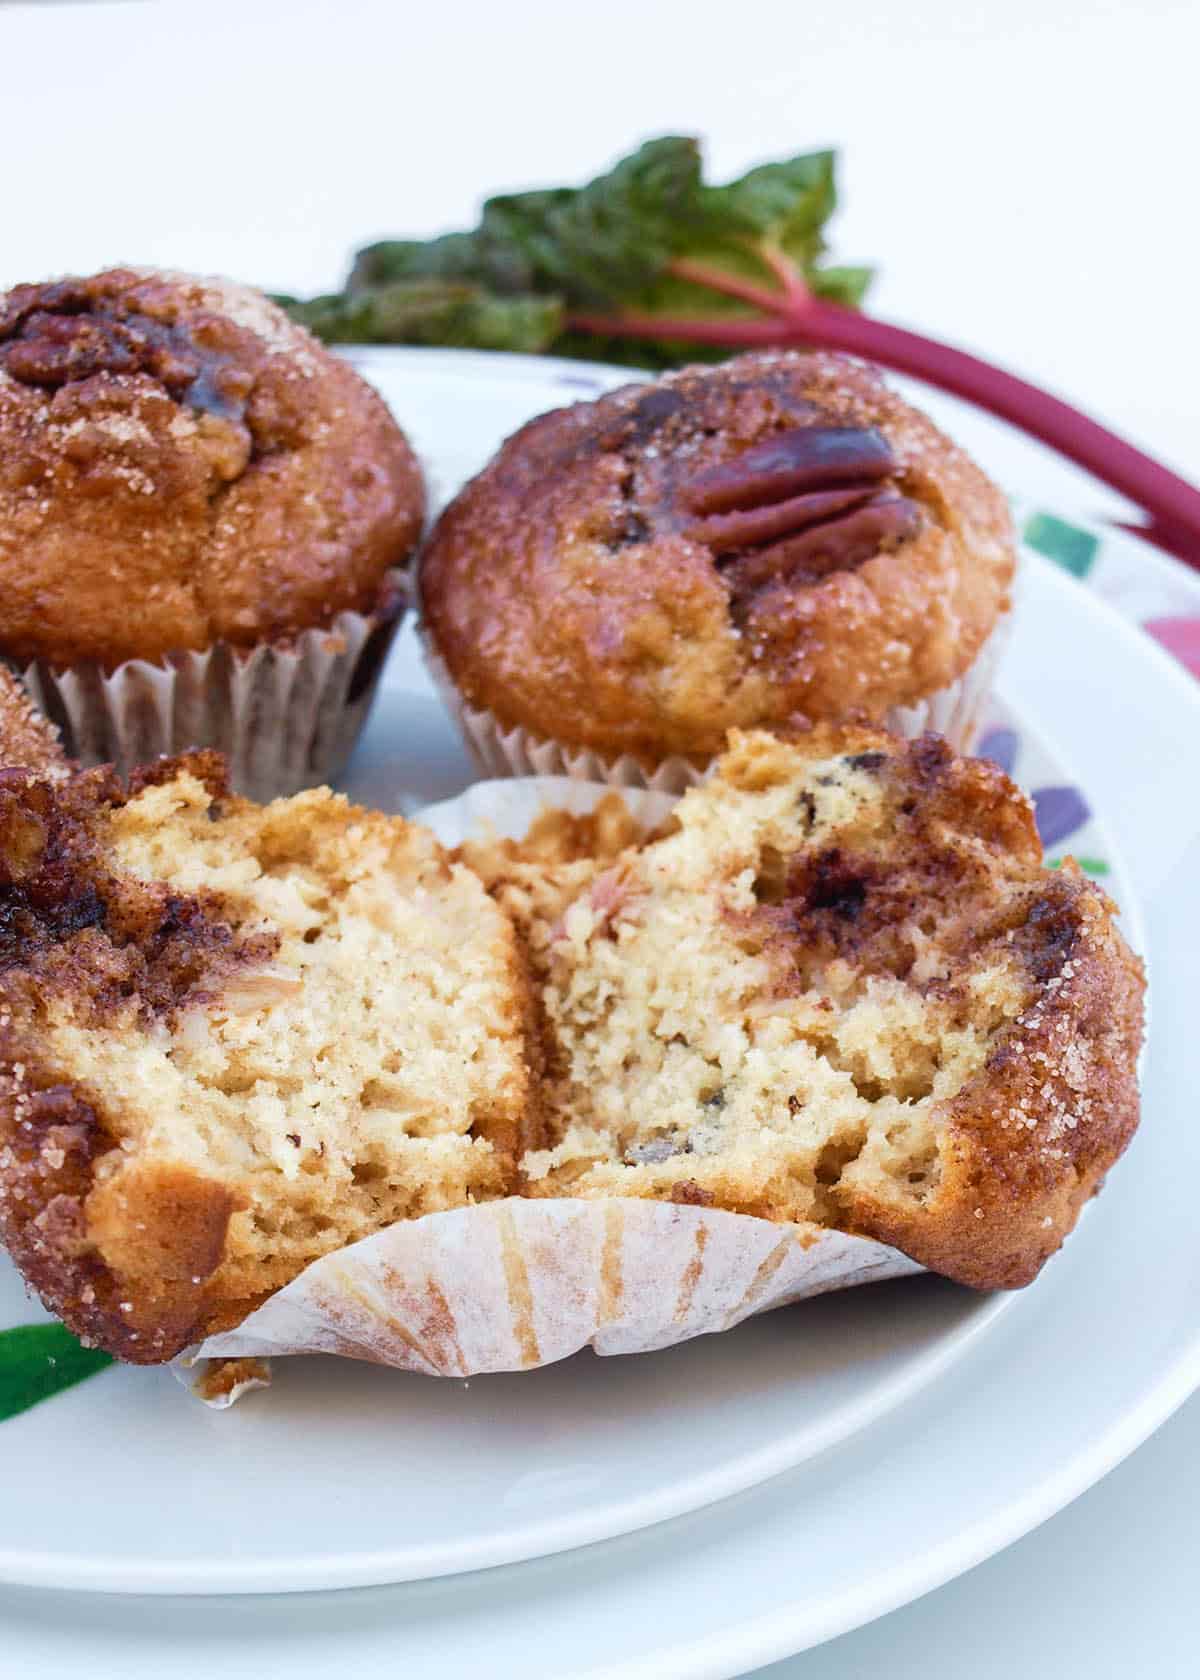 Rhubarb and Pecan Muffins one muffin cut open